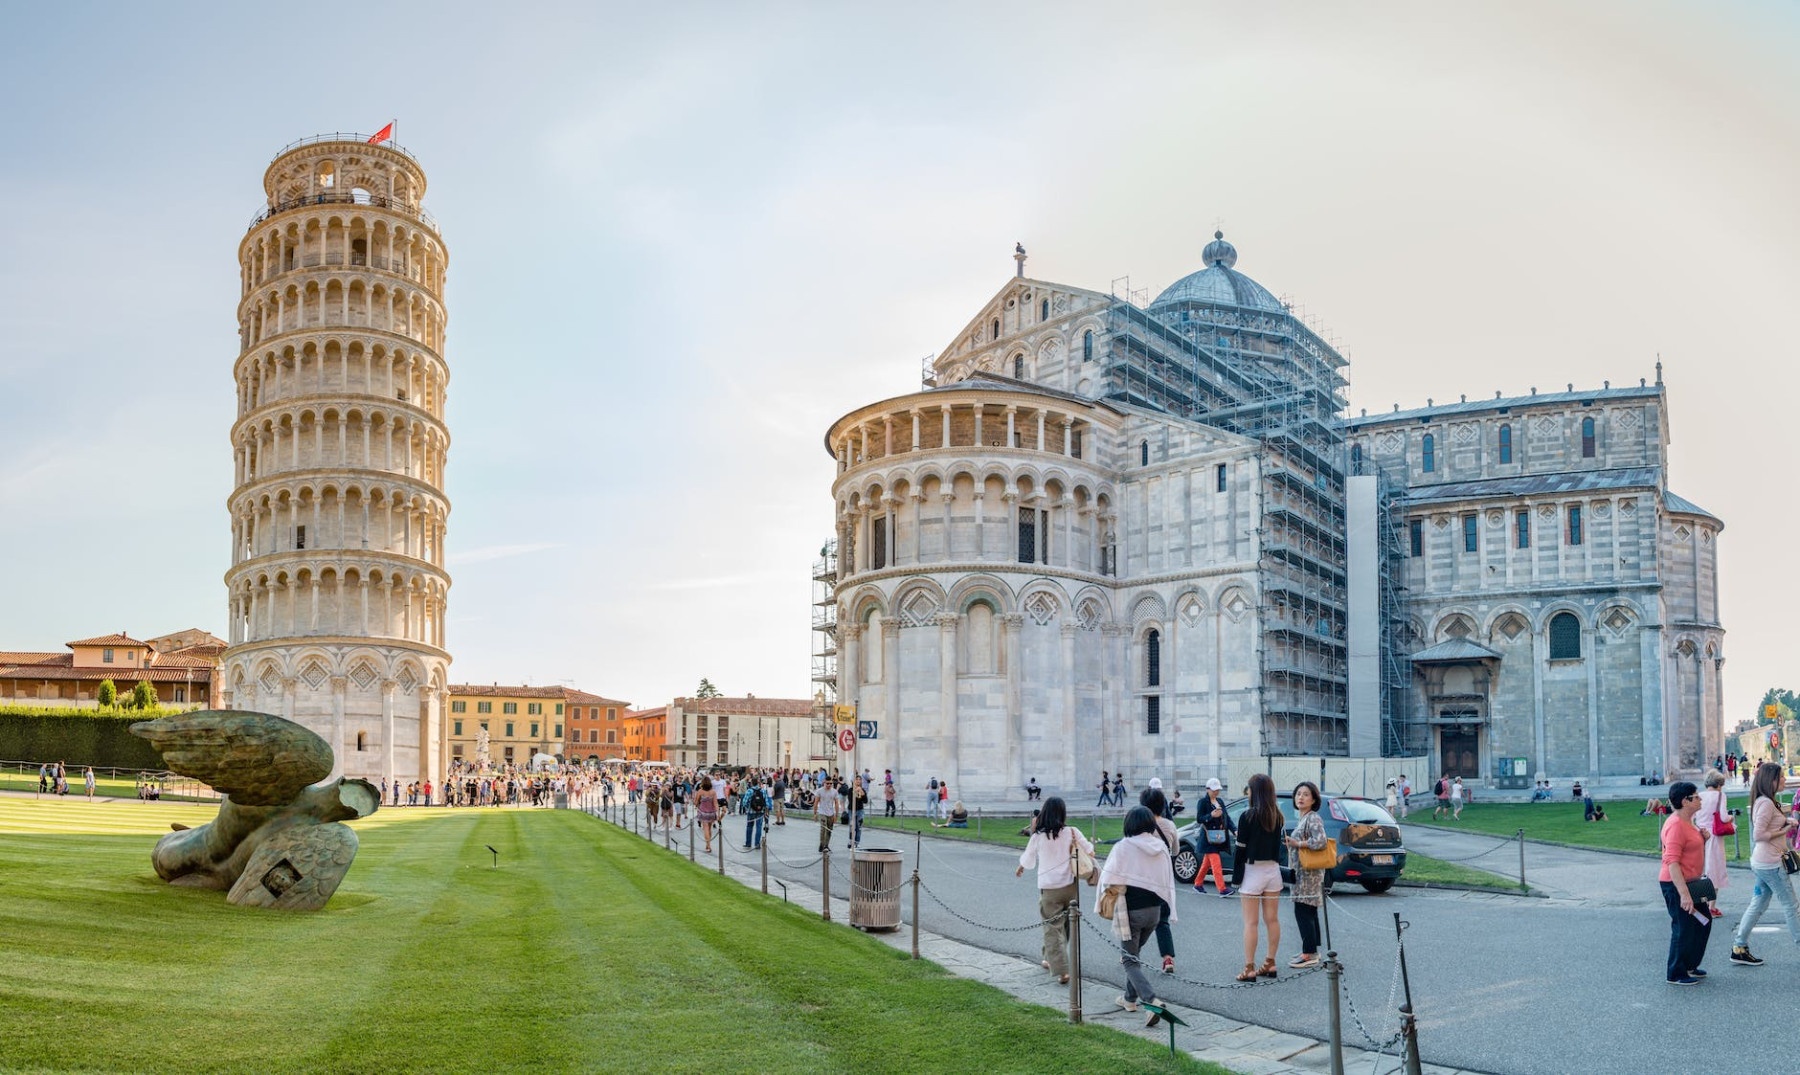 tourists visiting the famous tower of pisa and cathedral in pisa italy